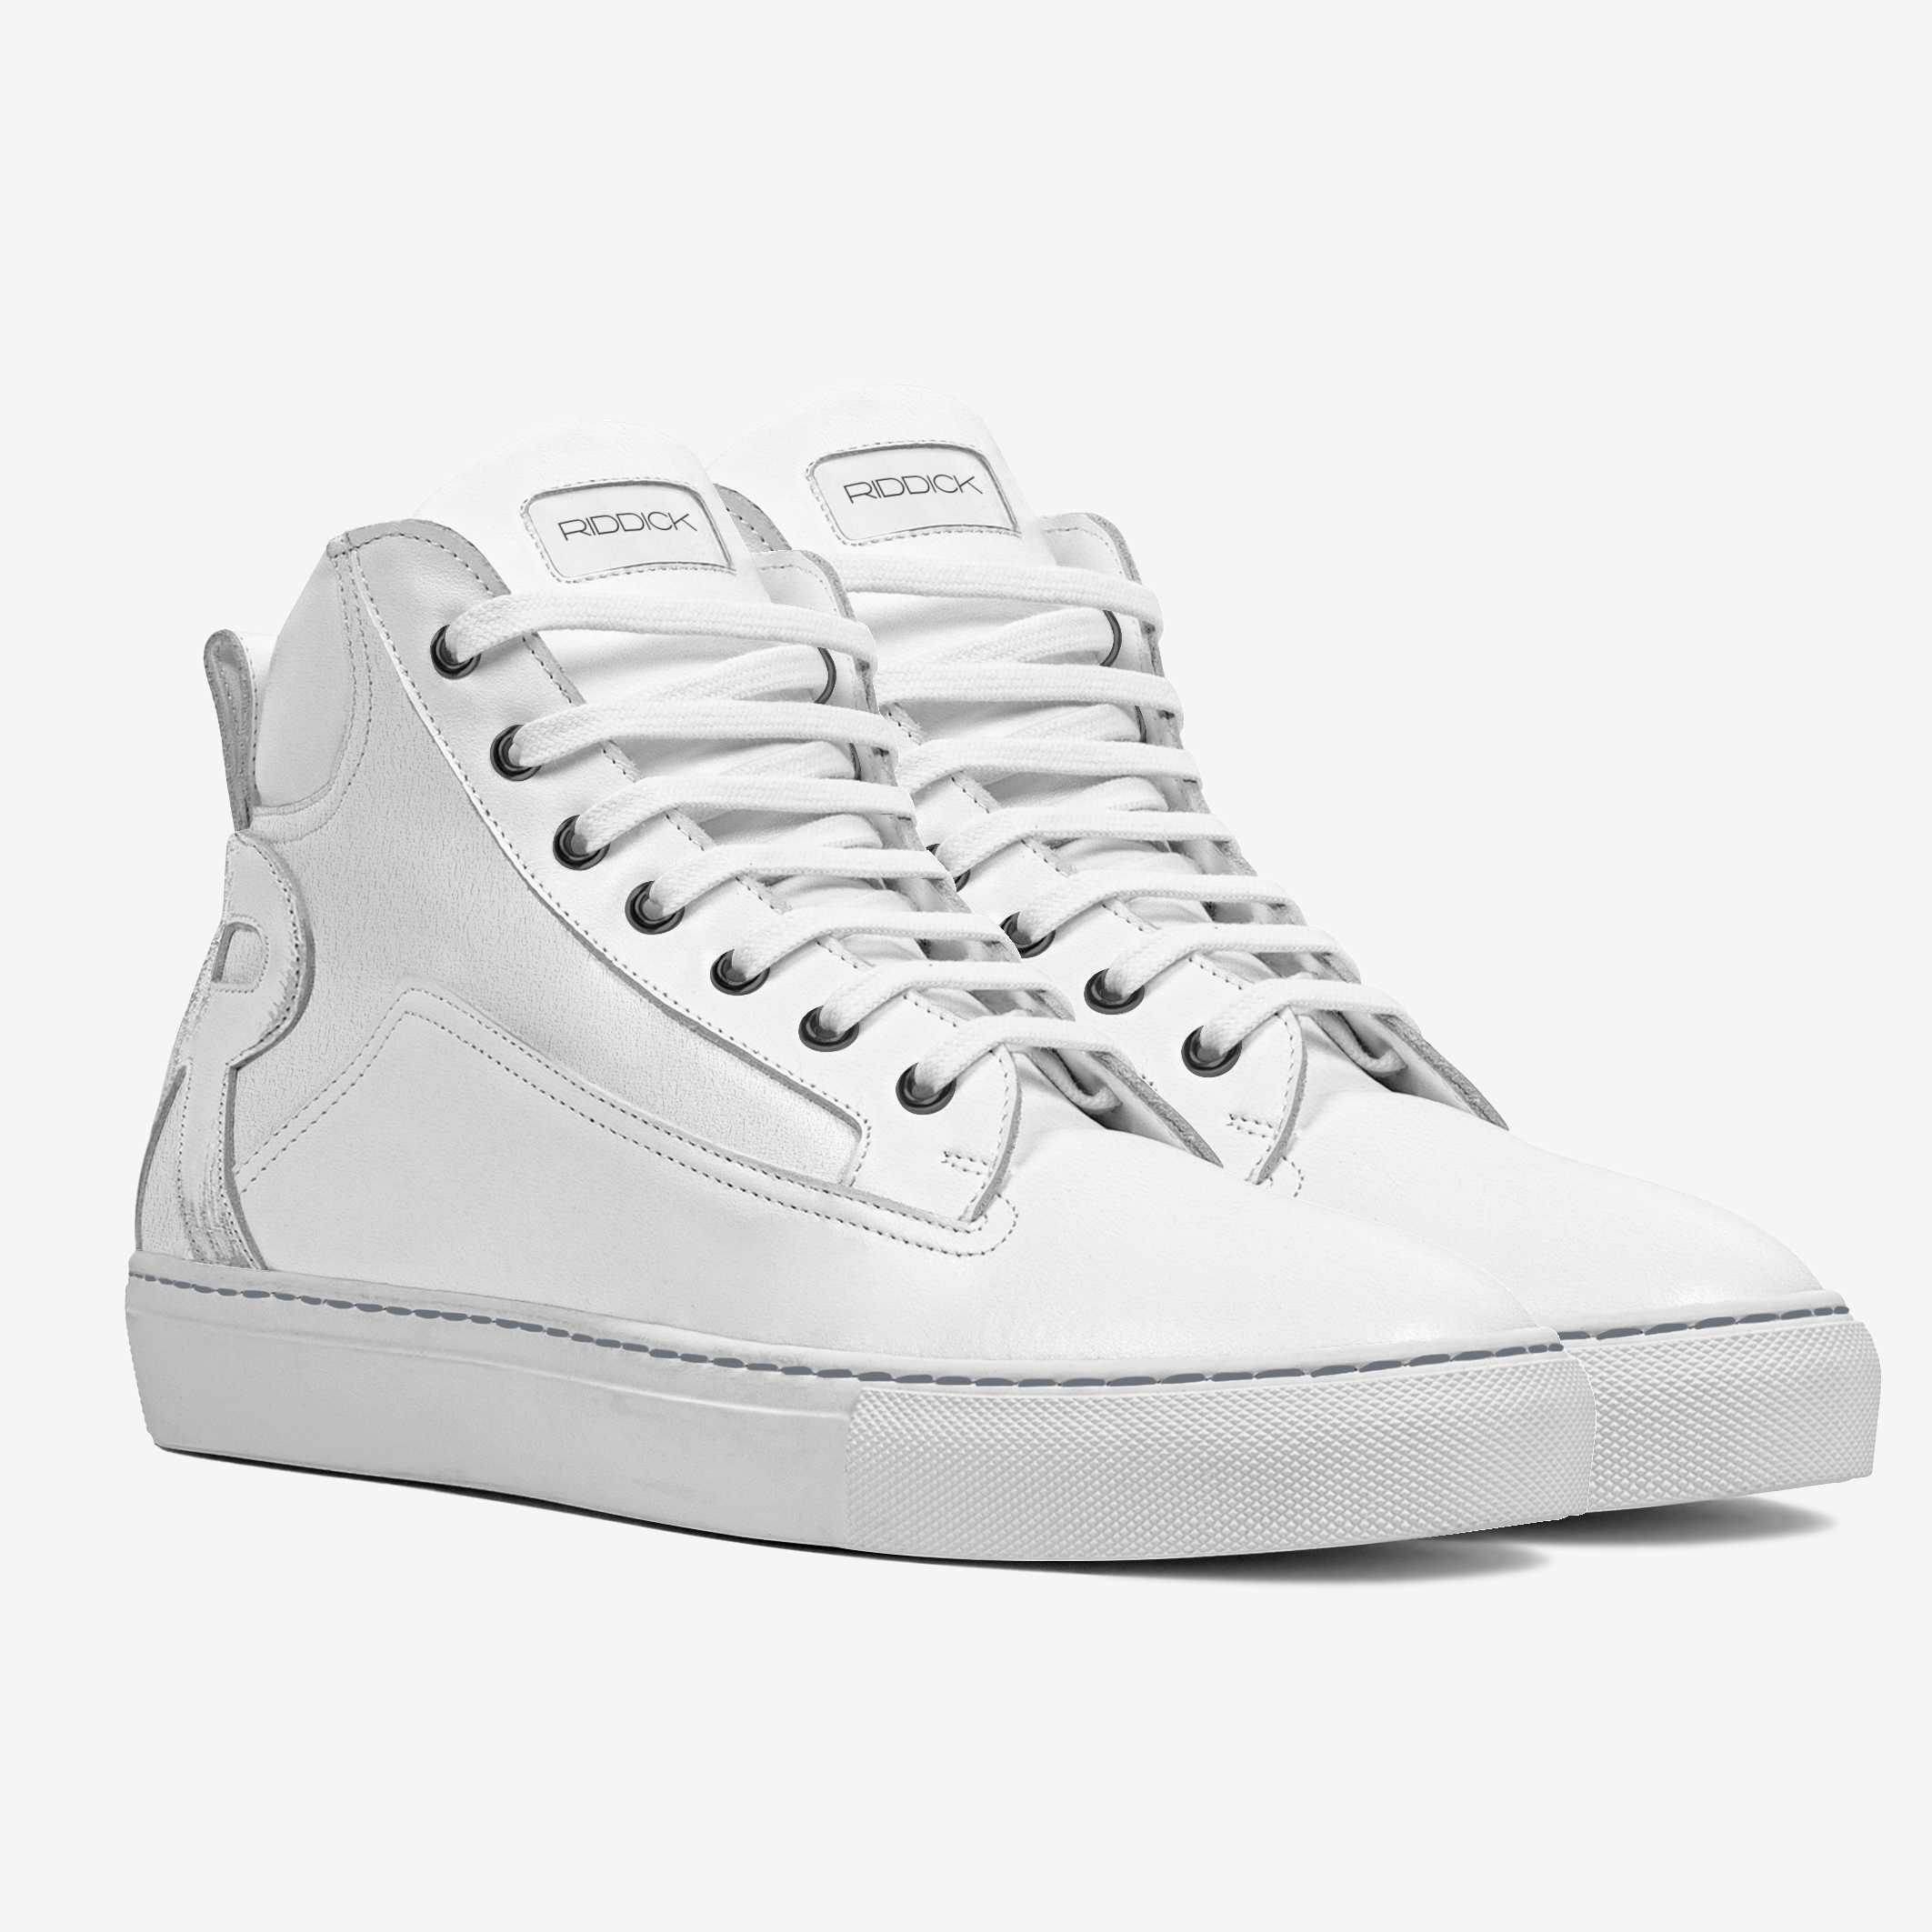 O.G. RIDDICK [White-Out] - Riddick Shoes Shoe Riddick Shoes   